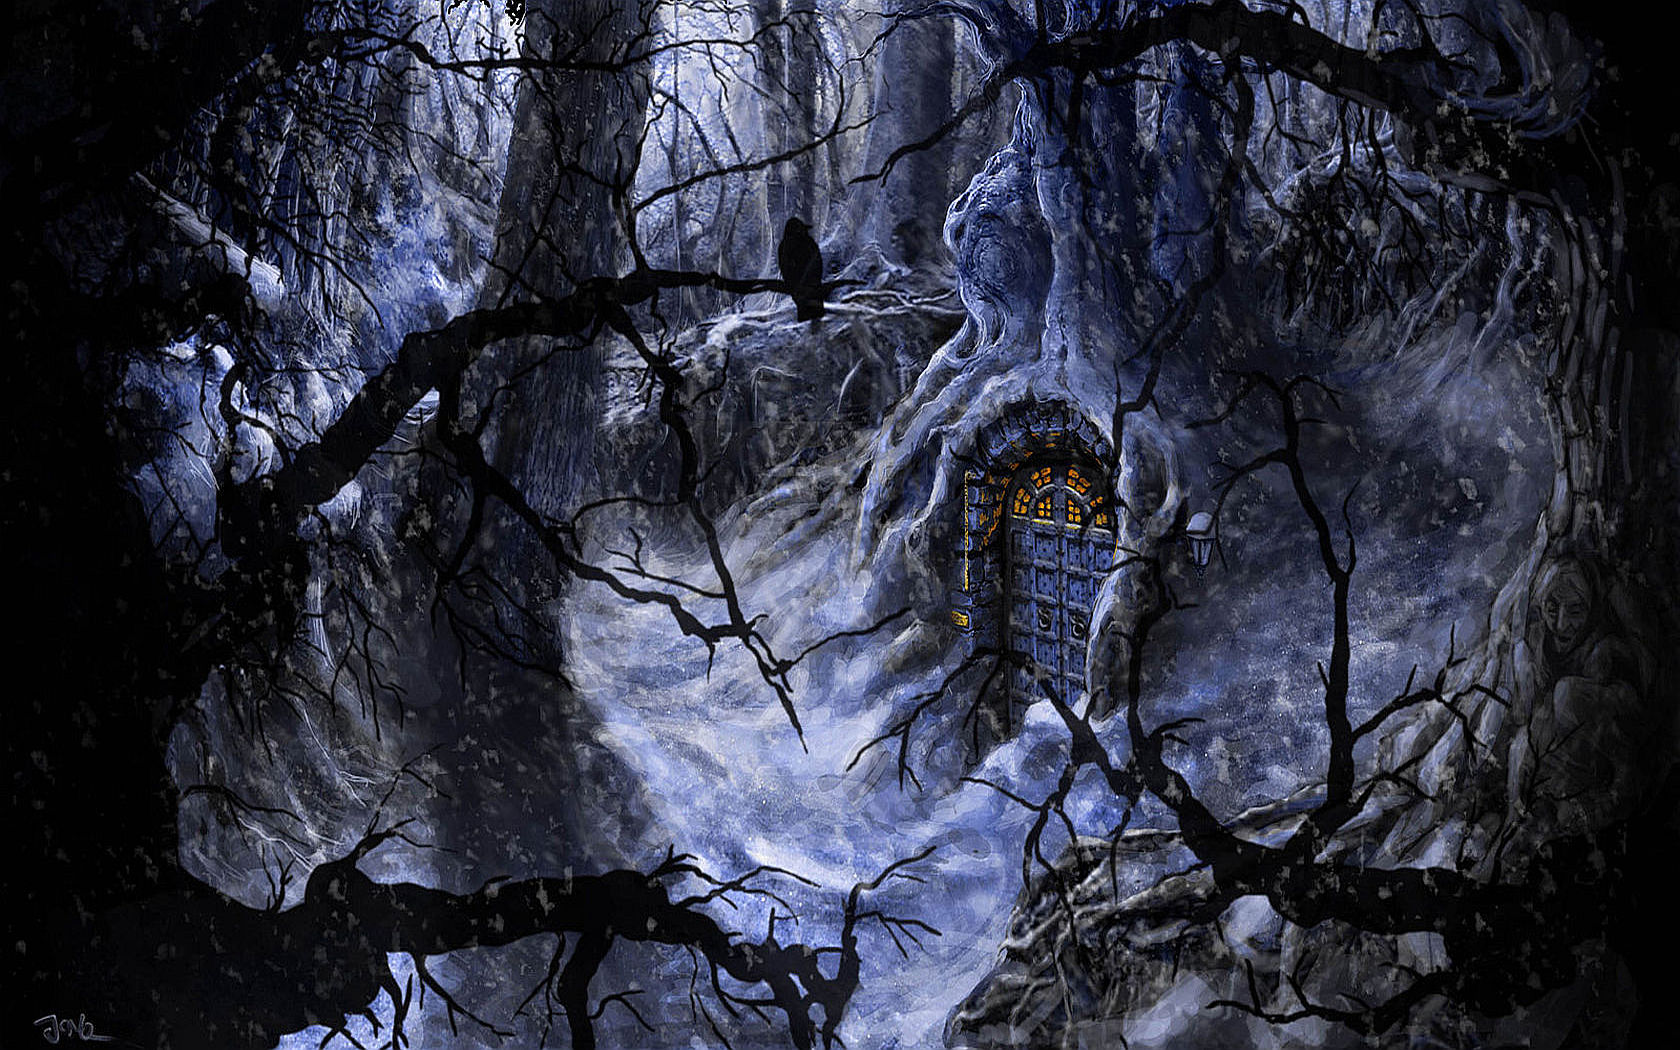 In The Forest: Artistic fantasy scene with a dark forest, snowy landscape, a door, and a bird.